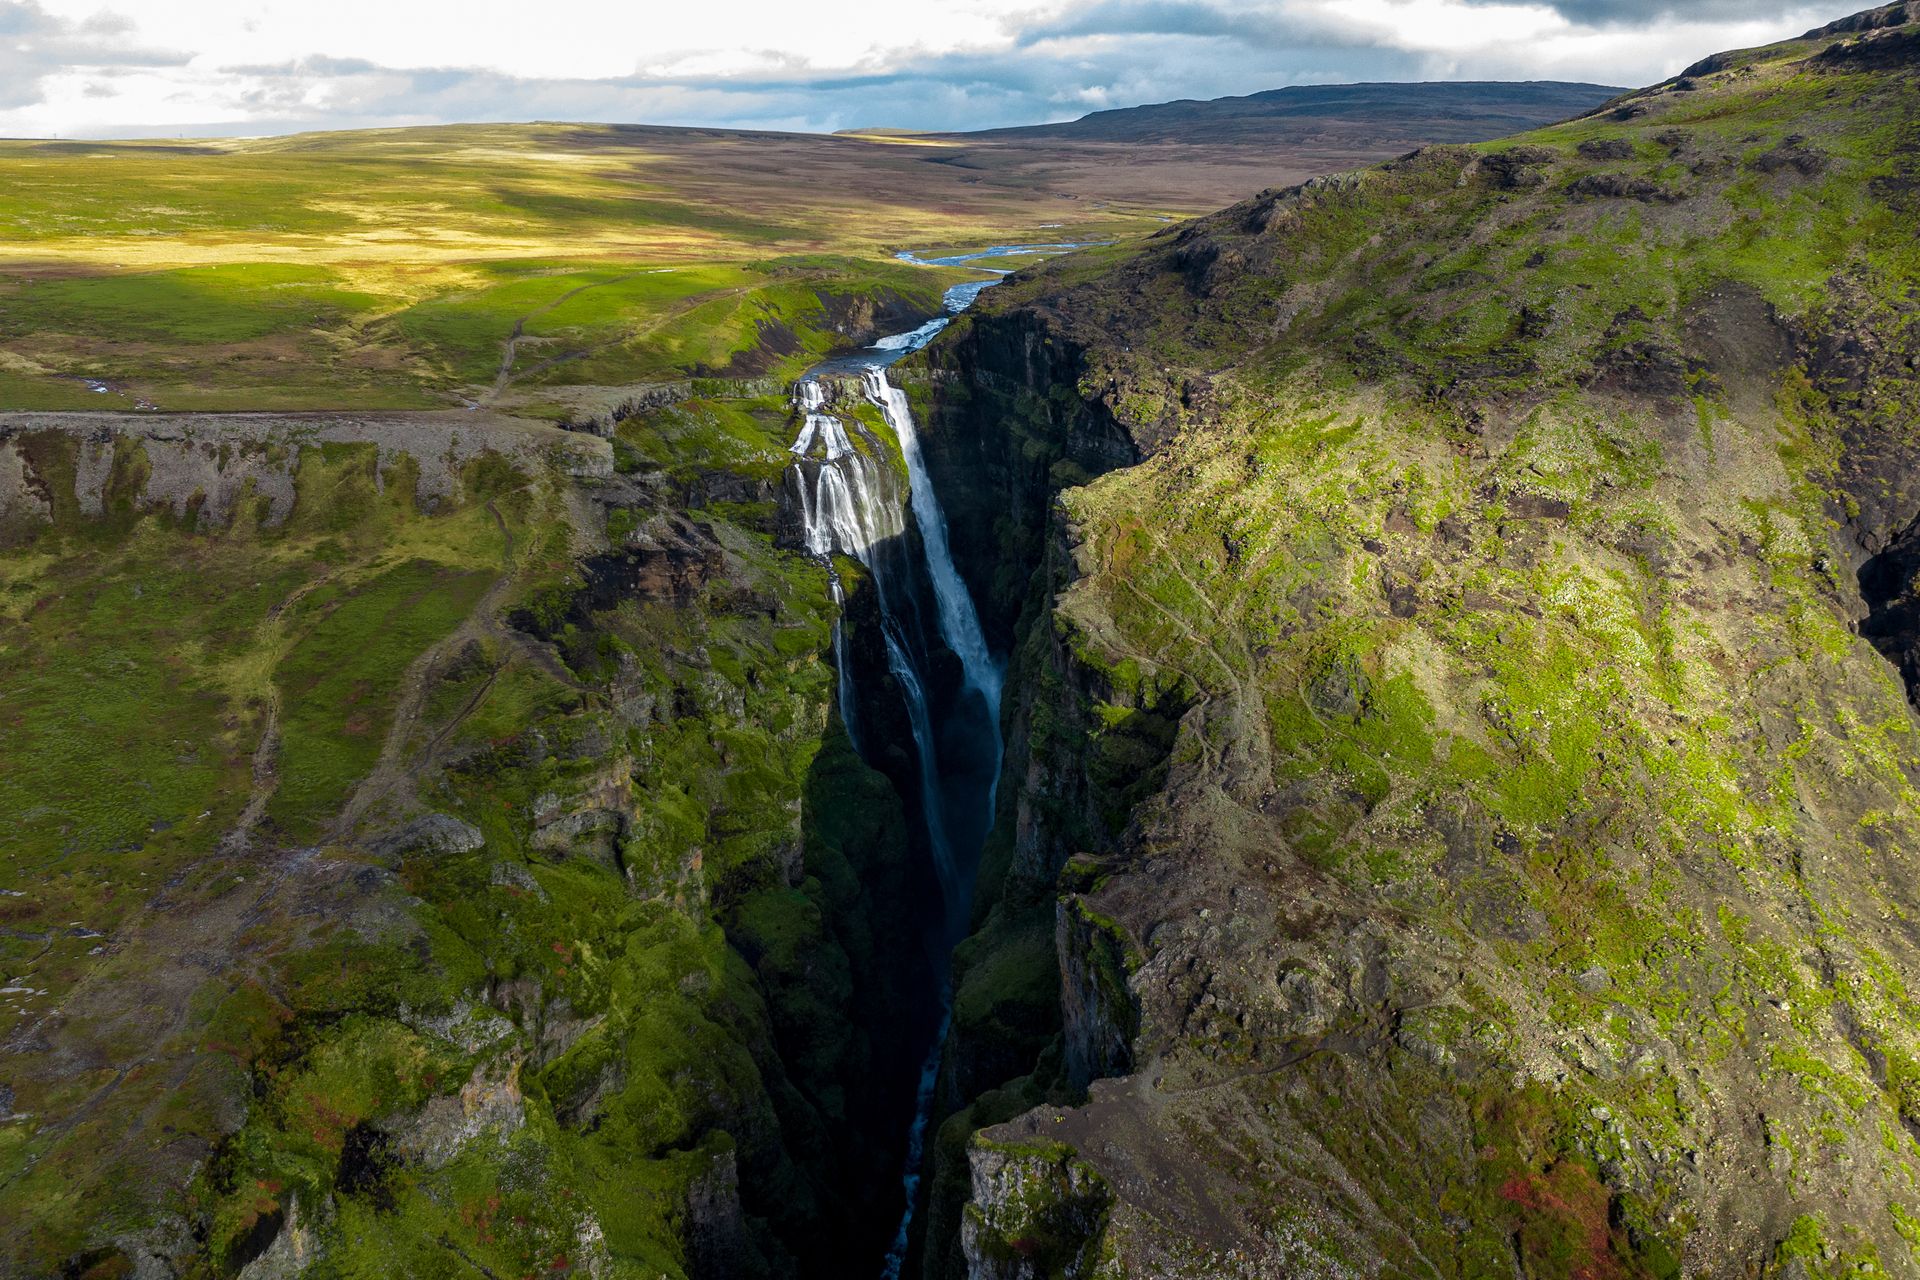 Aerial view of Glymur Canyon with its towering waterfall